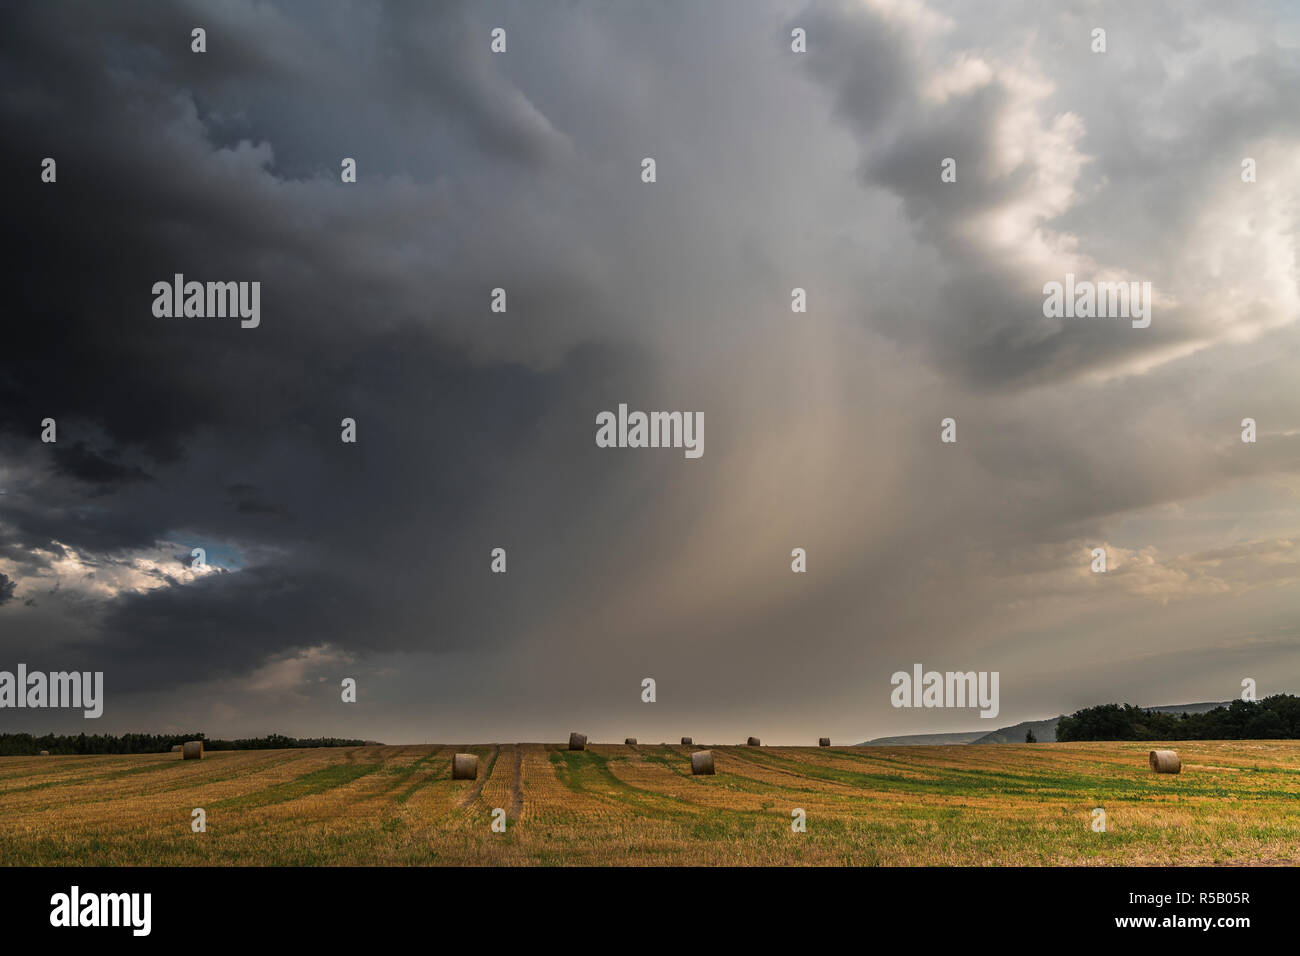 Thunderstorm over stubble field, Thuringia, Germany Stock Photo